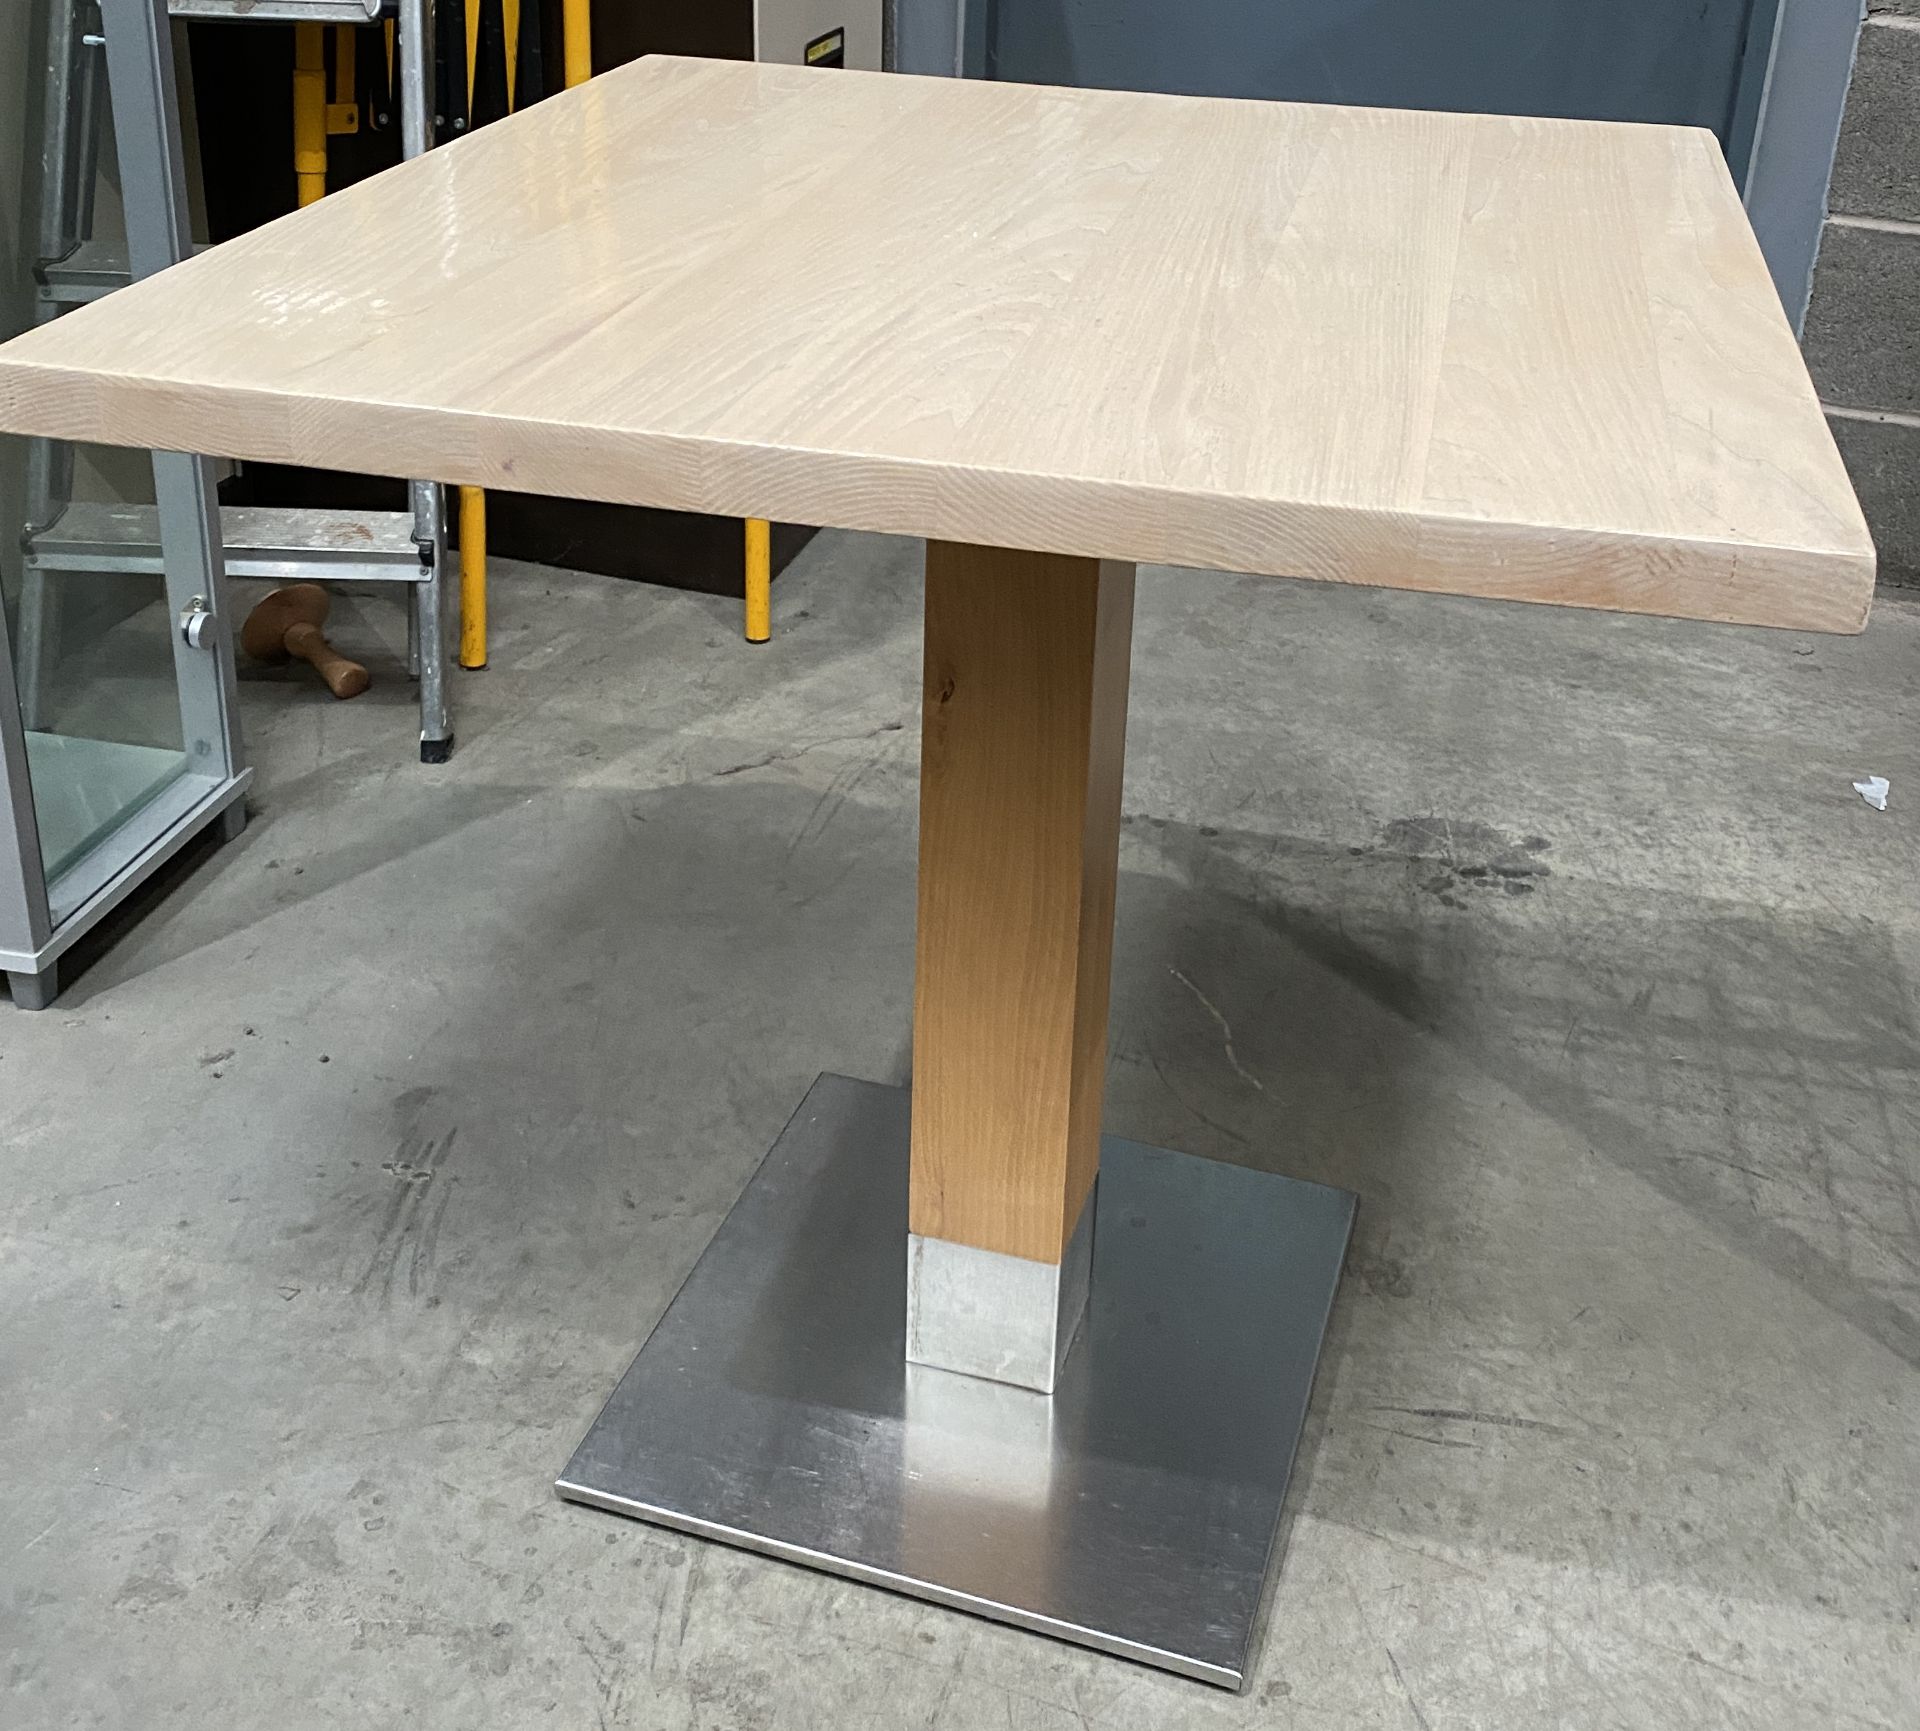 5 x Stainless Steel Based Square Wooden Dining Tables - 70cm x 70cm (75cm high)